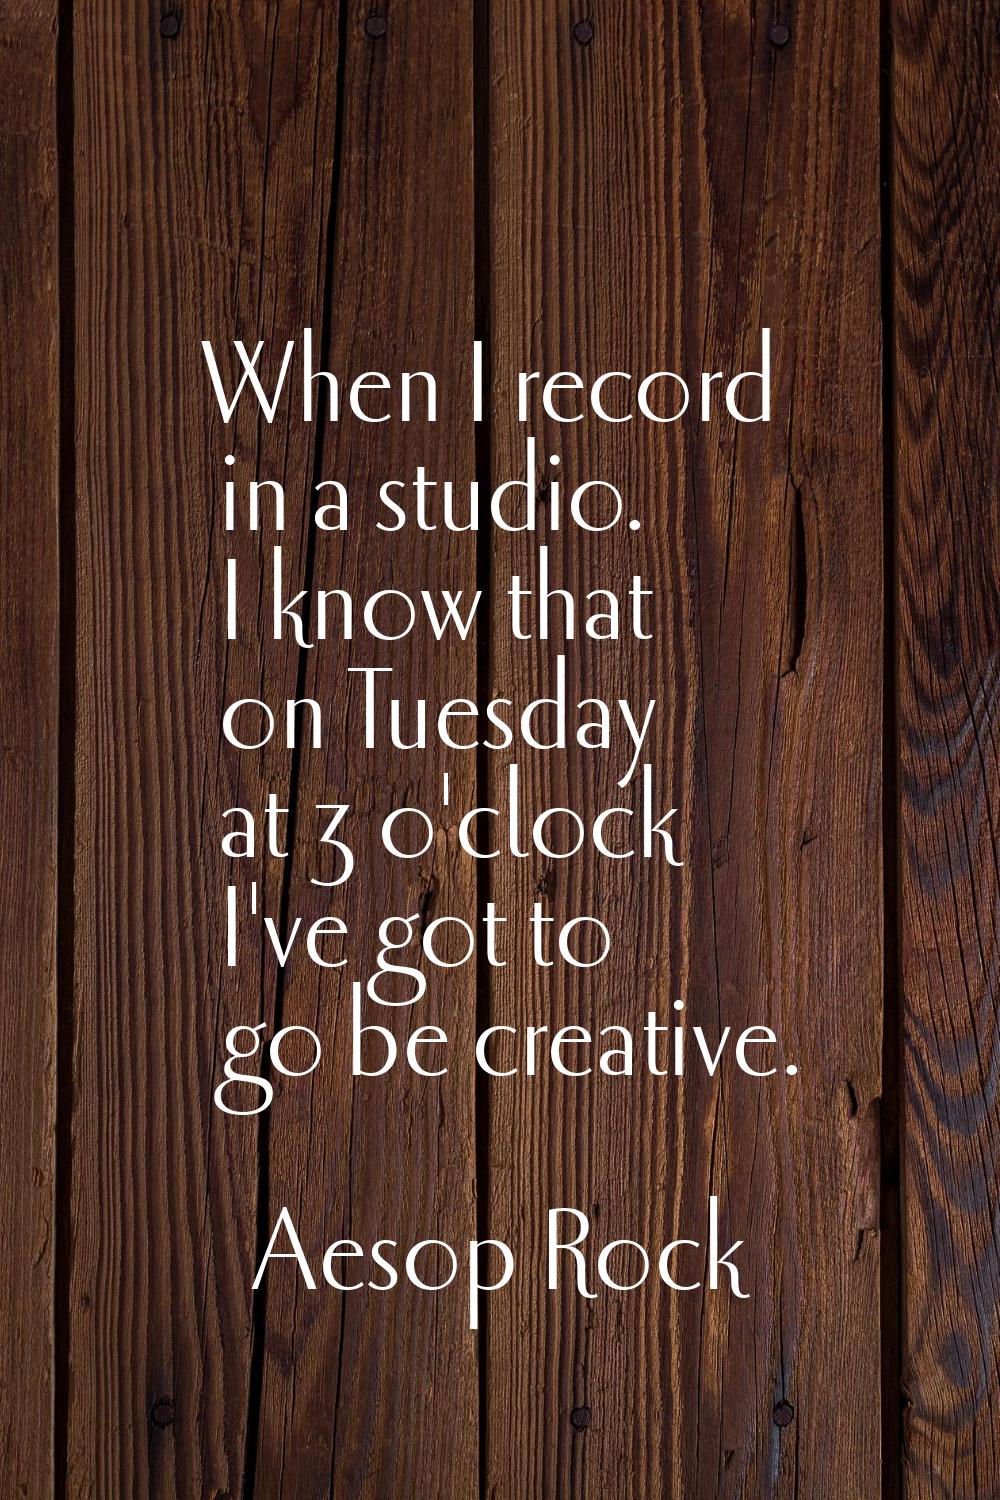 When I record in a studio. I know that on Tuesday at 3 o'clock I've got to go be creative.